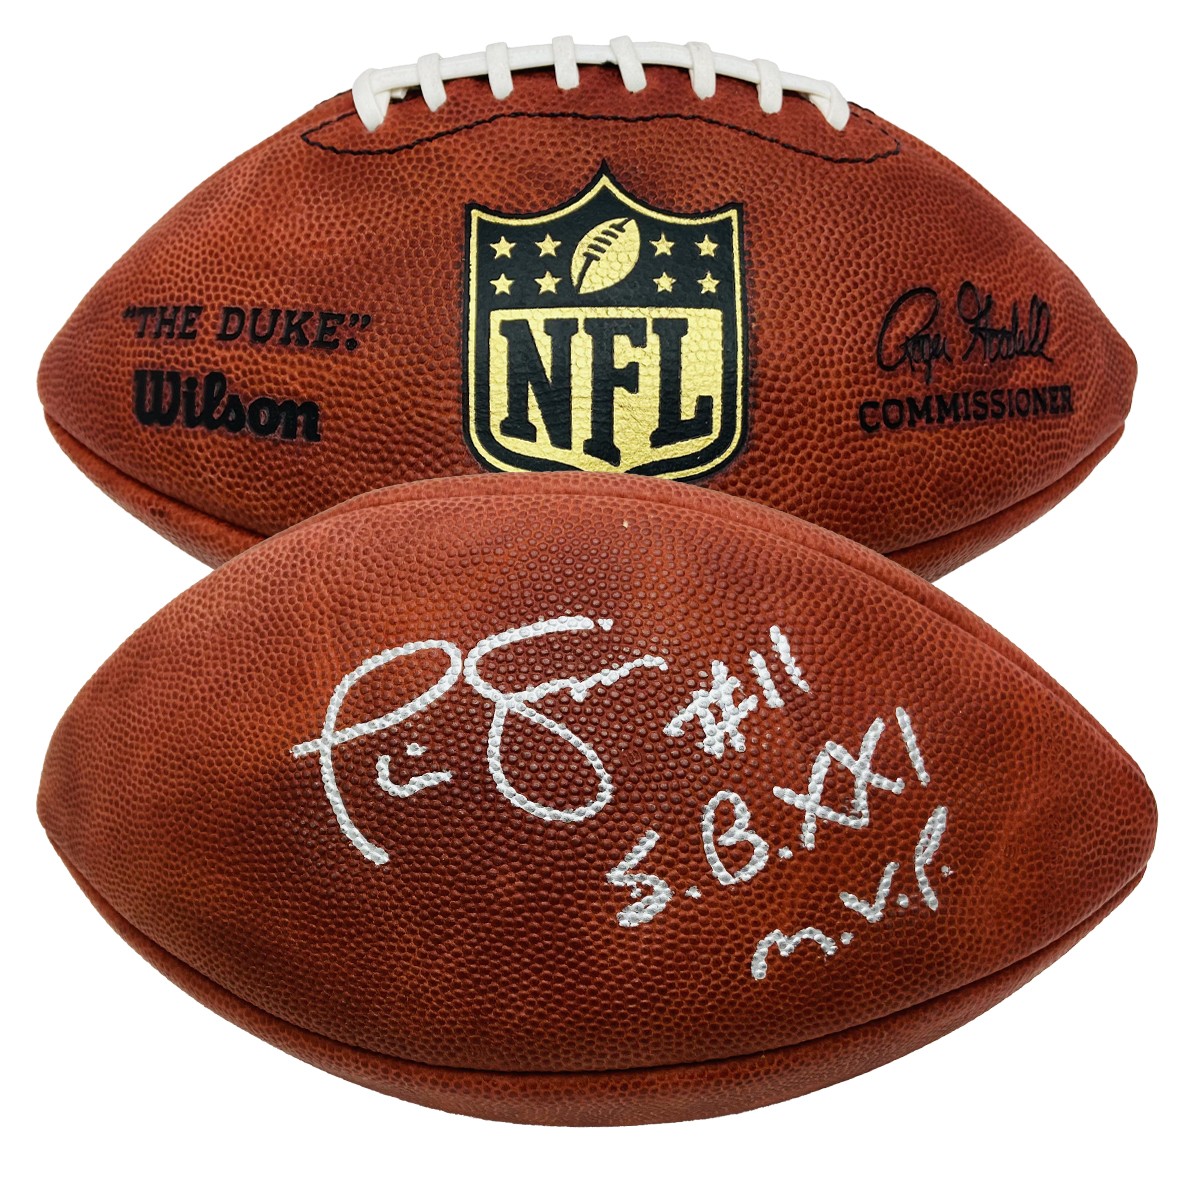 nfl official ball price